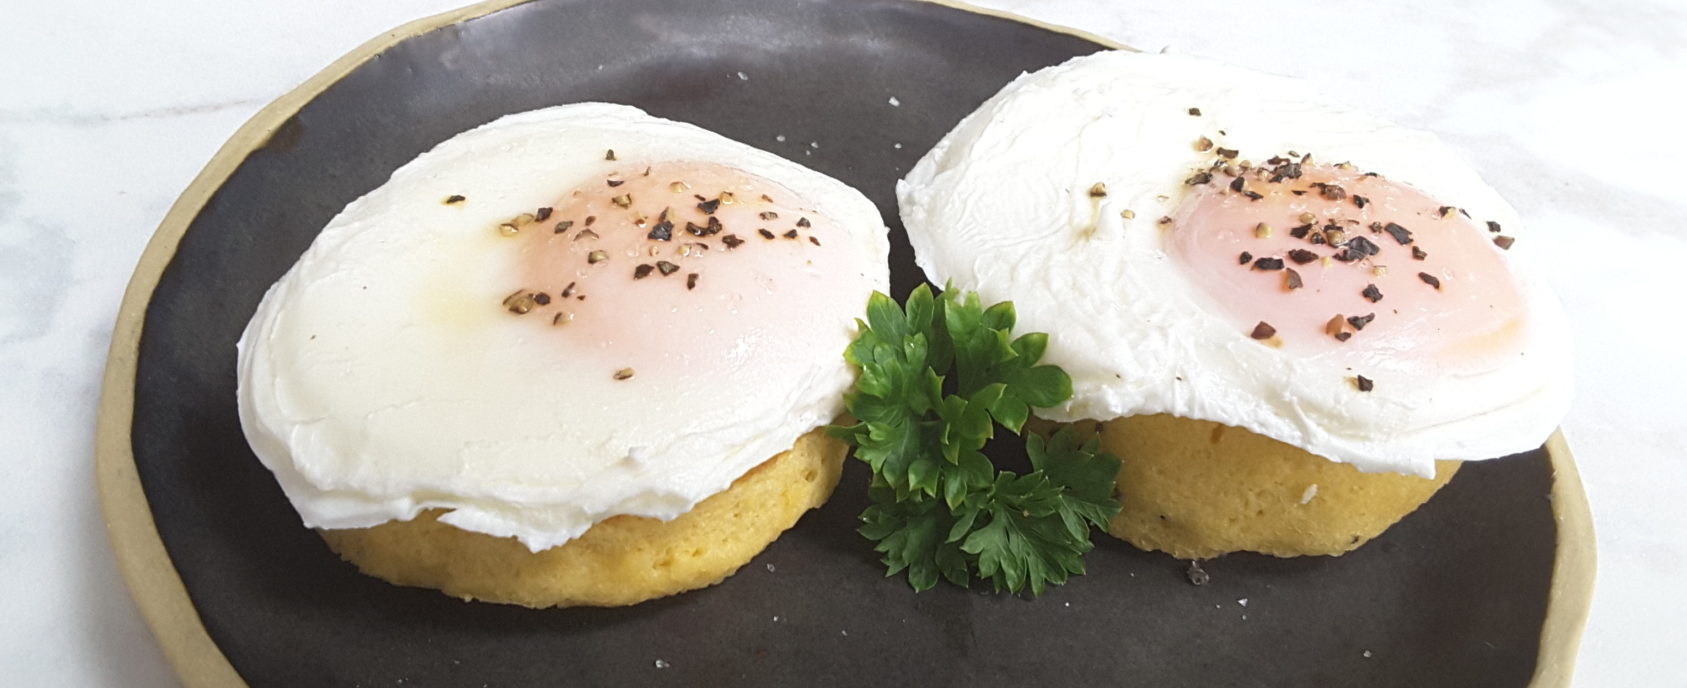 90 Second Low Carb English Muffin